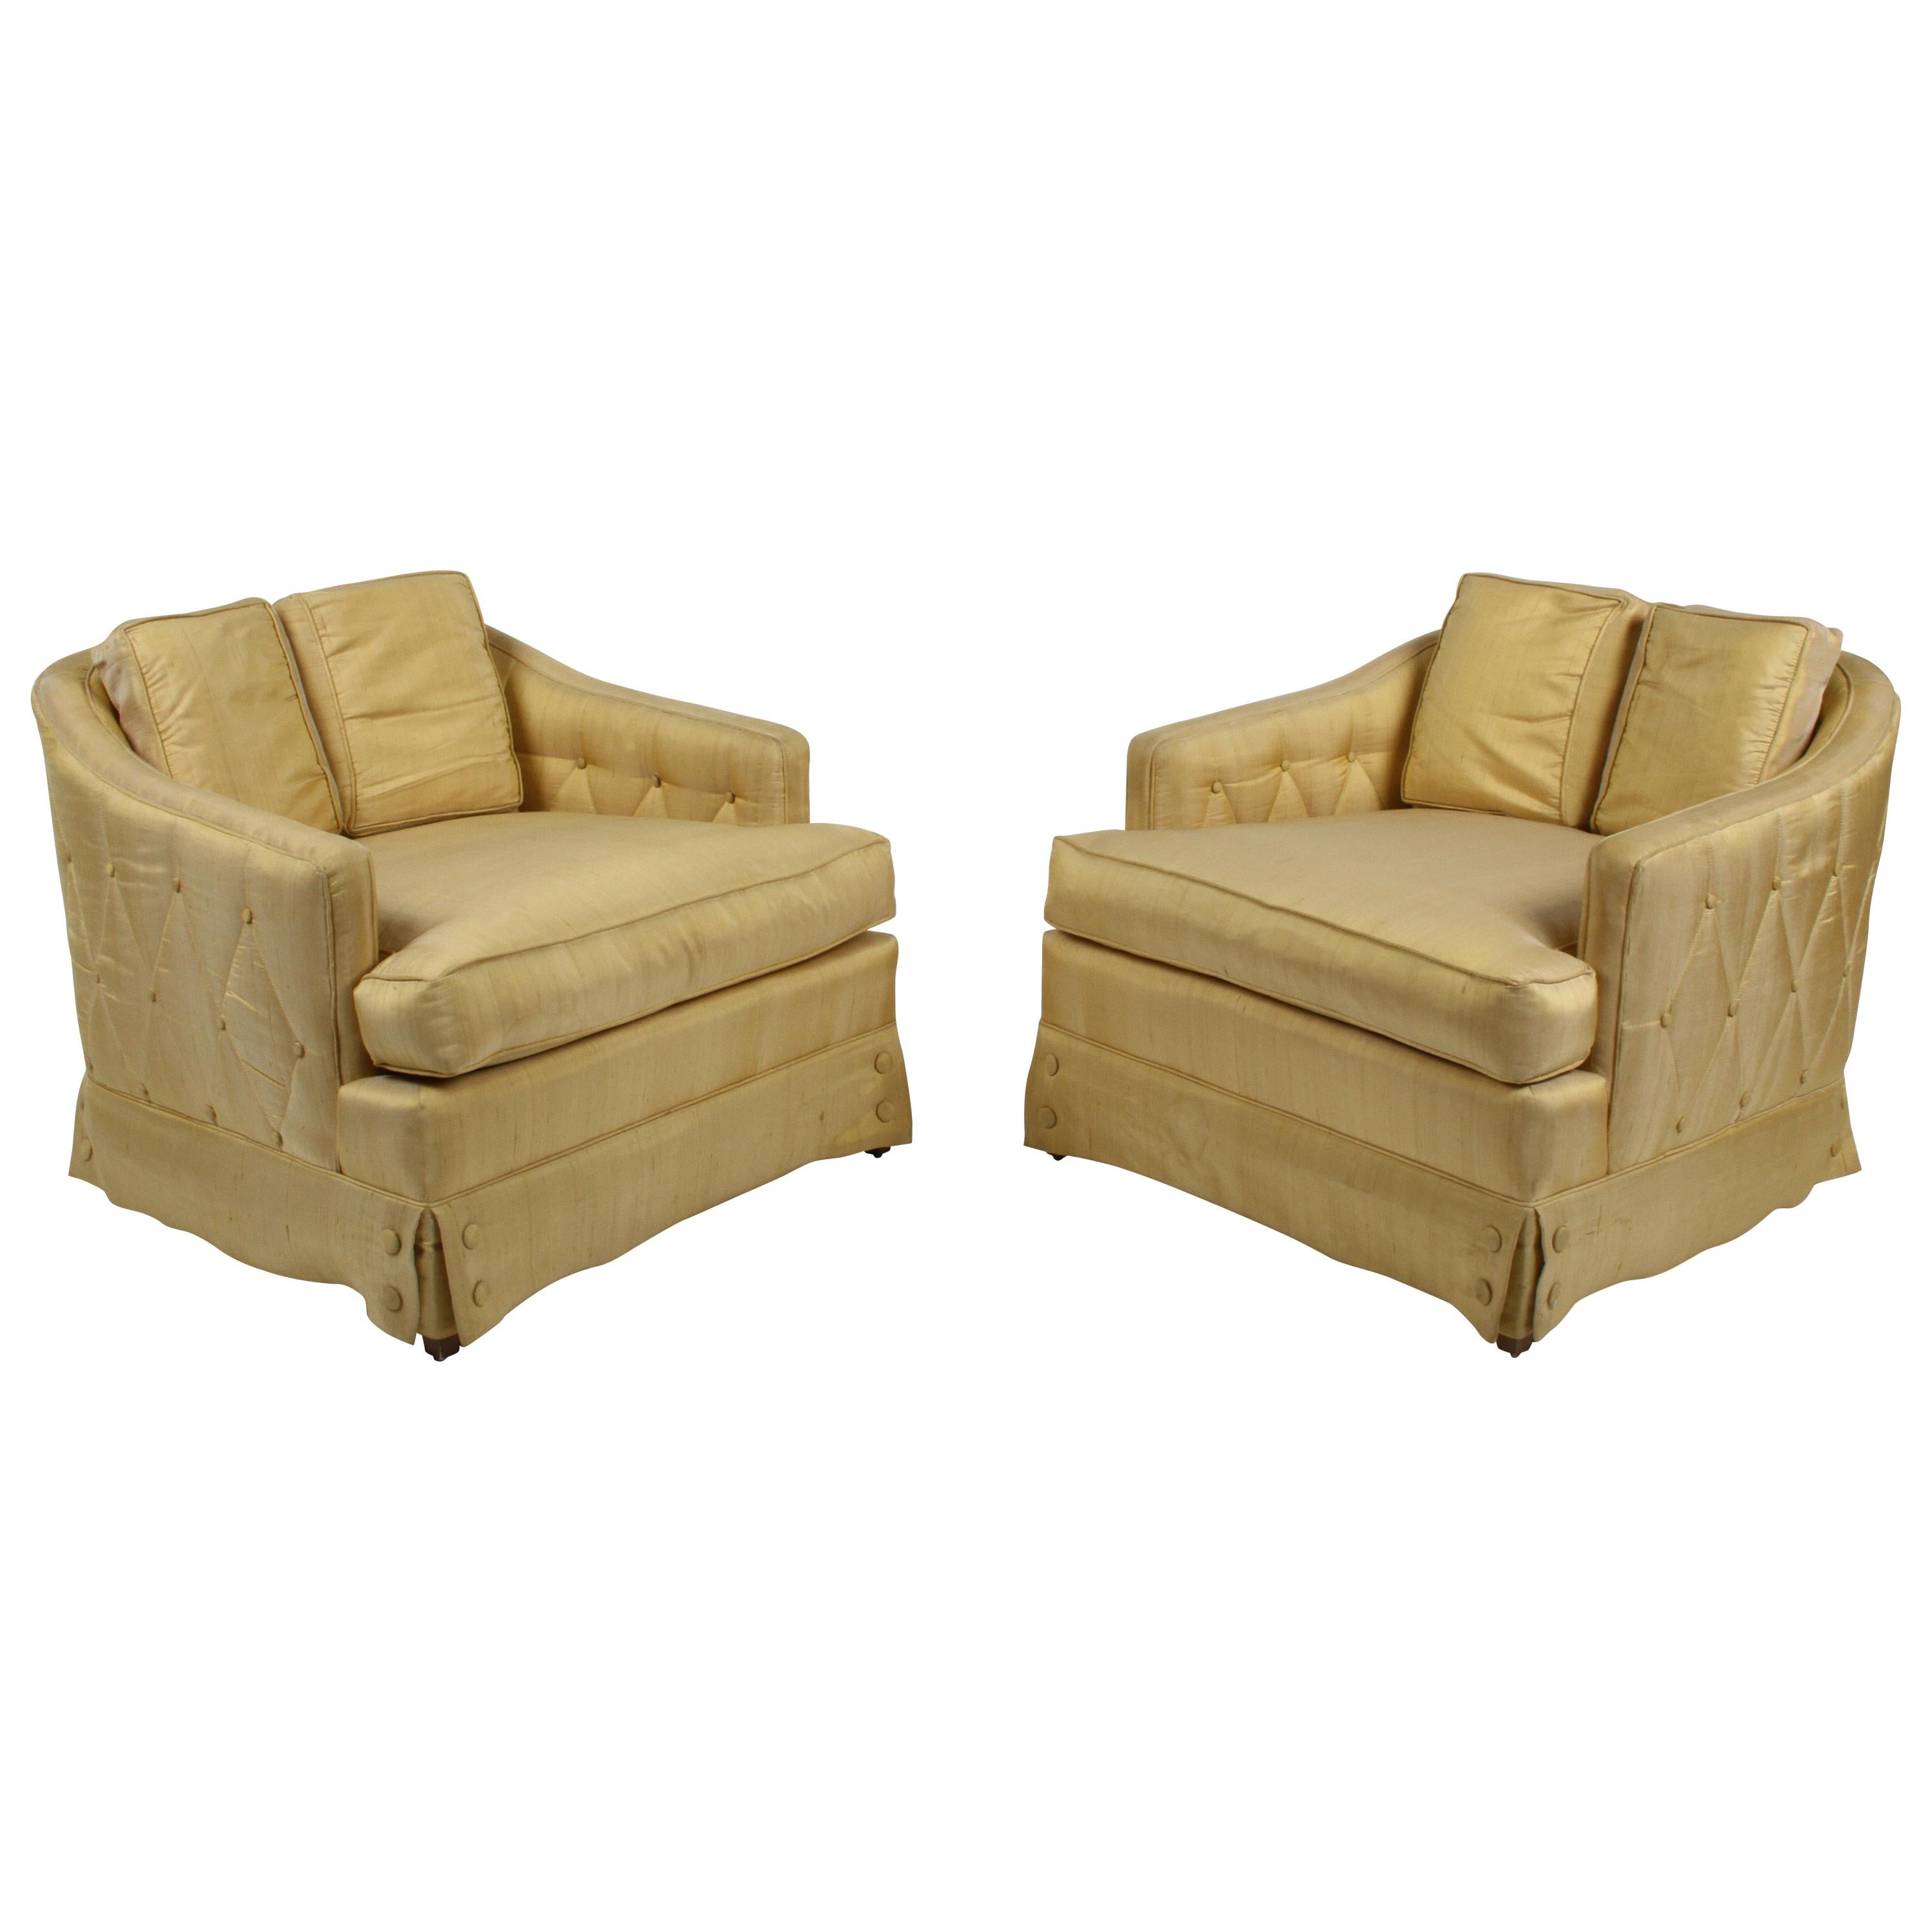 Pair of Hollywood Regency Tomlinson Parkway Terrace Lounge Chairs with Ottoman